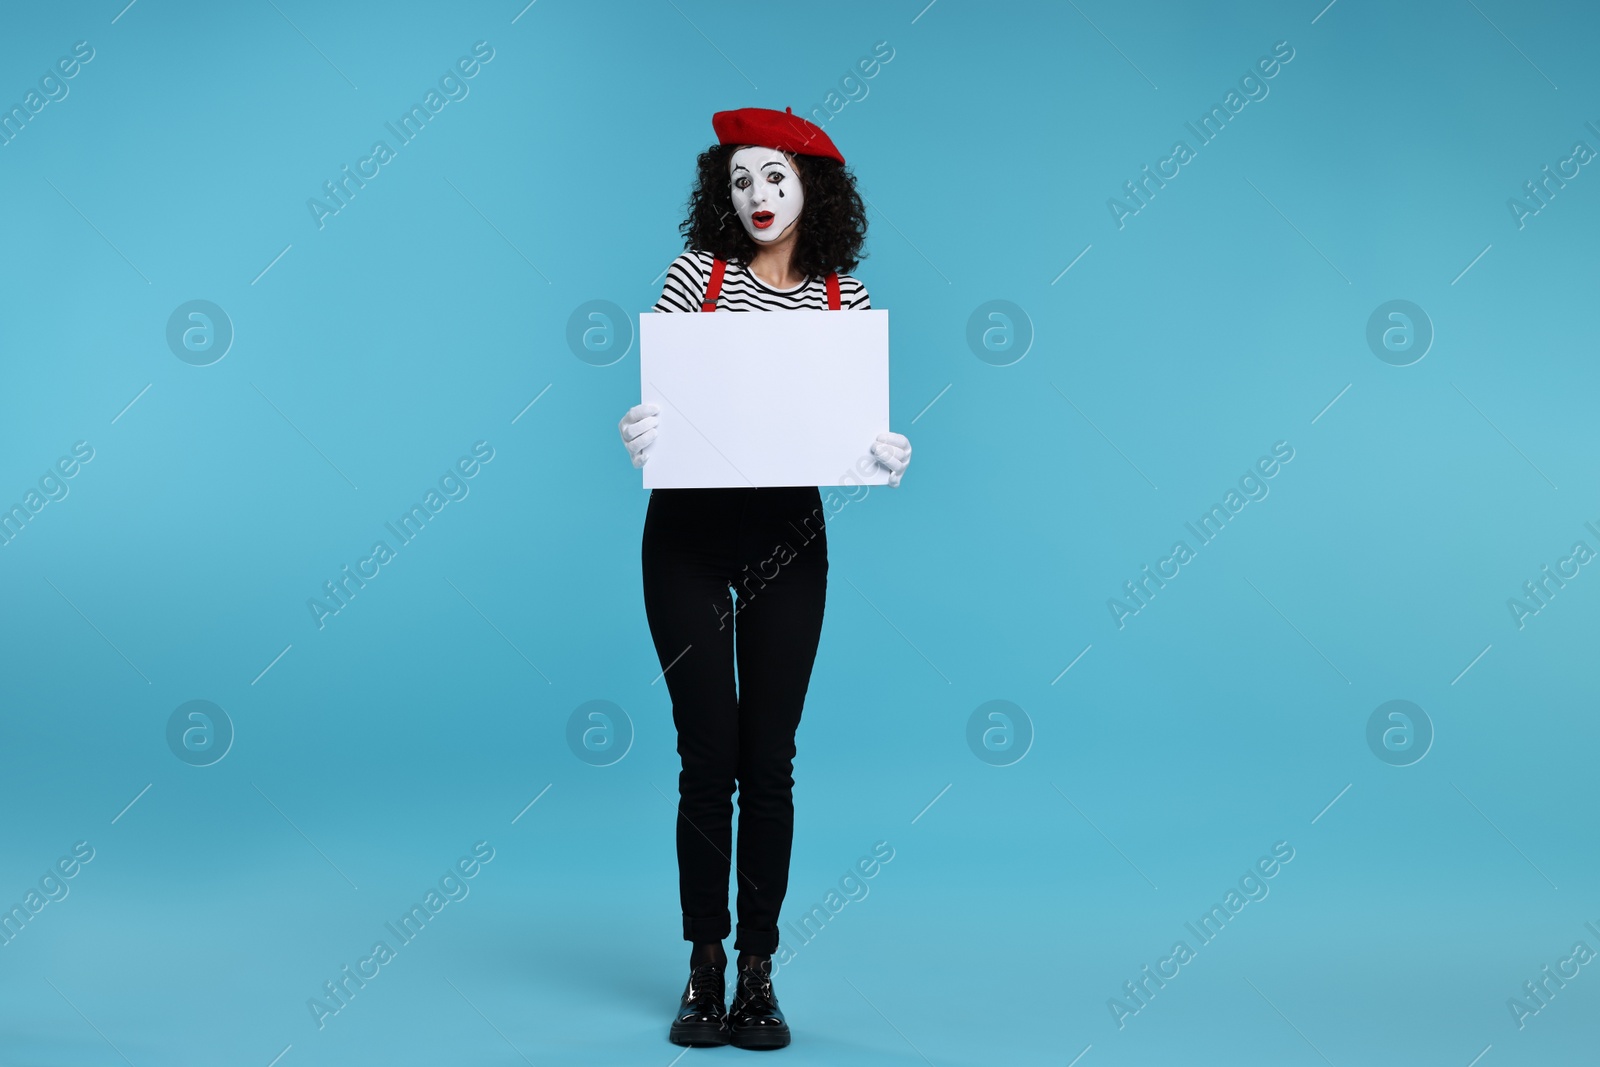 Photo of Funny mime with blank sign posing on light blue background